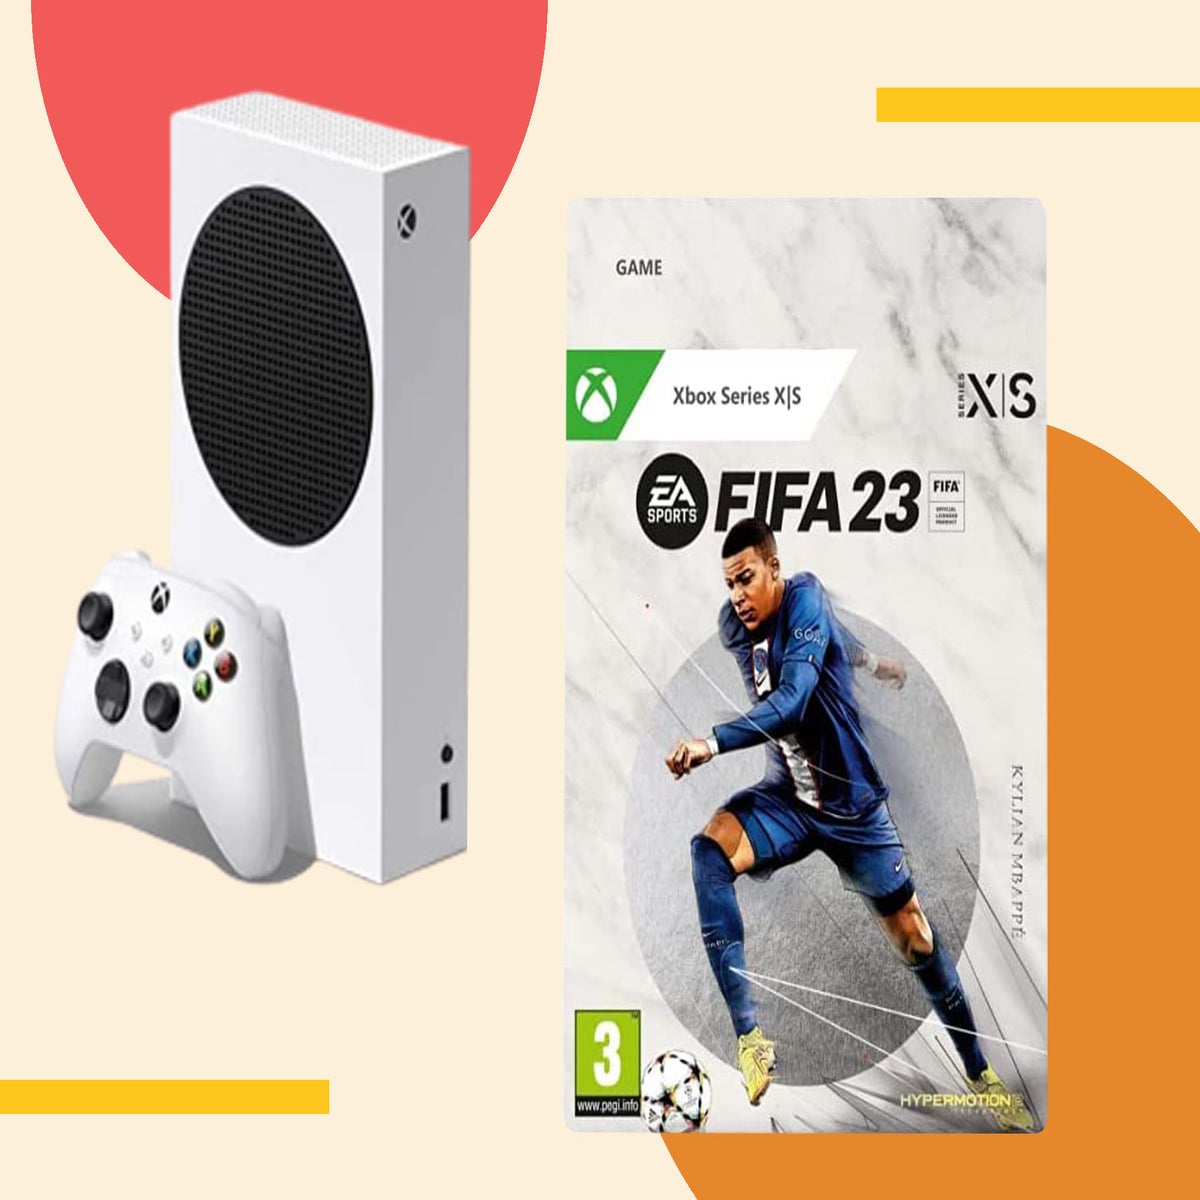 I play FIFA 23 on Xbox Series S and accidentally purchased the